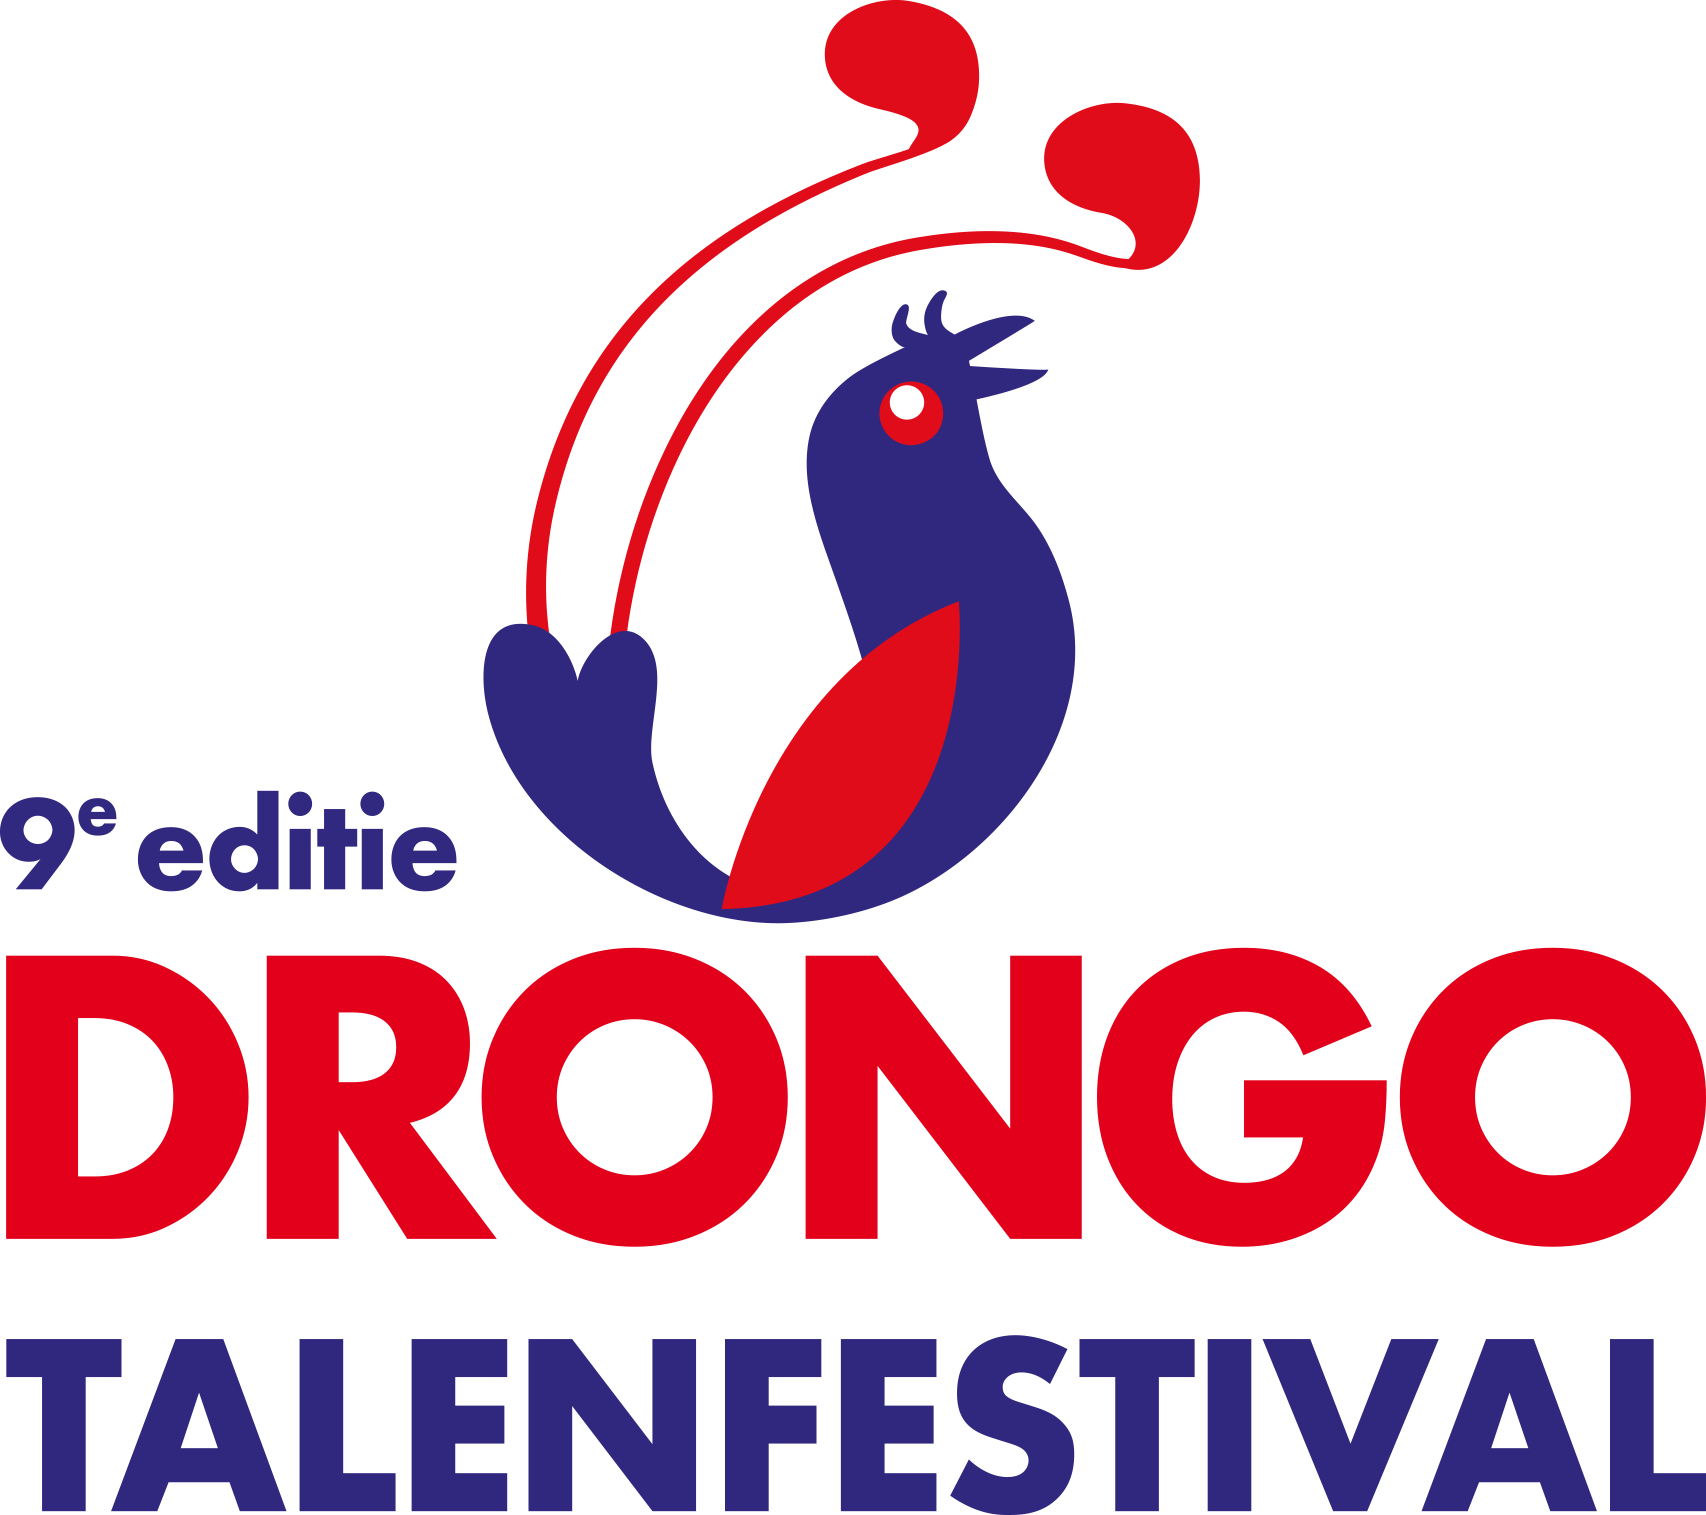 DRONGO talenfestival 2020